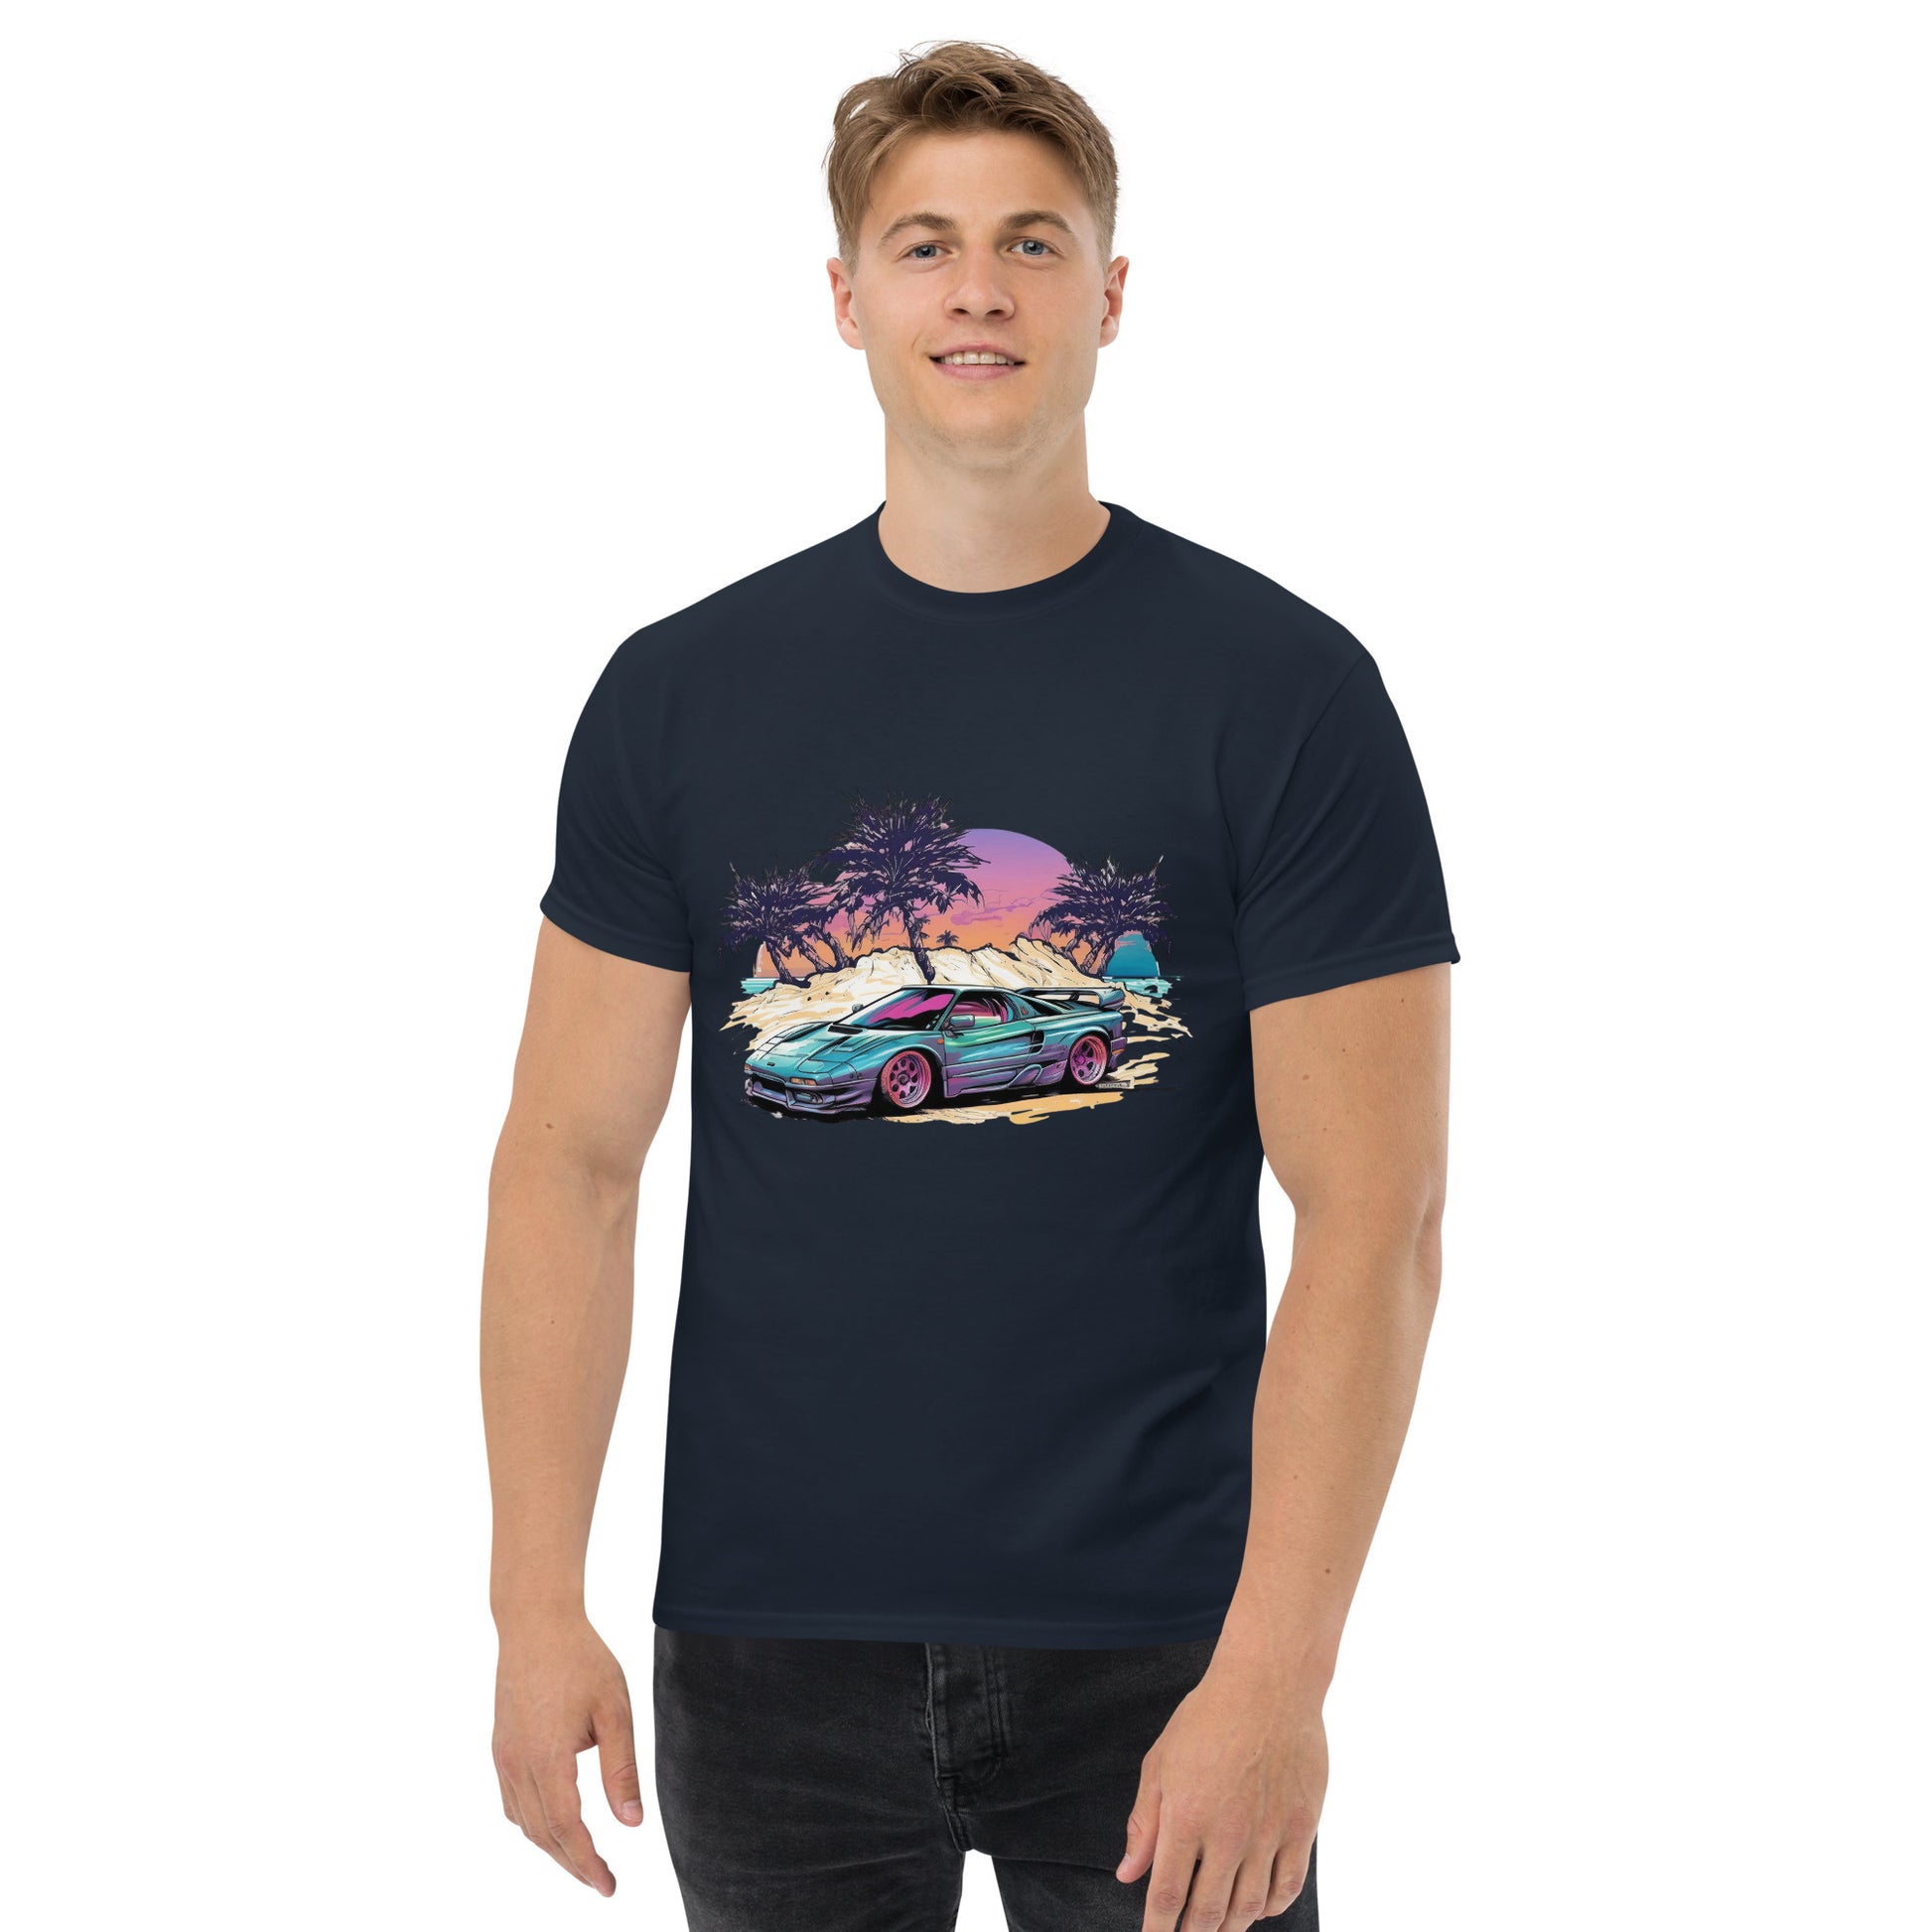 man with navy blue t-shirt with picture of vintage car in front of palm trees 